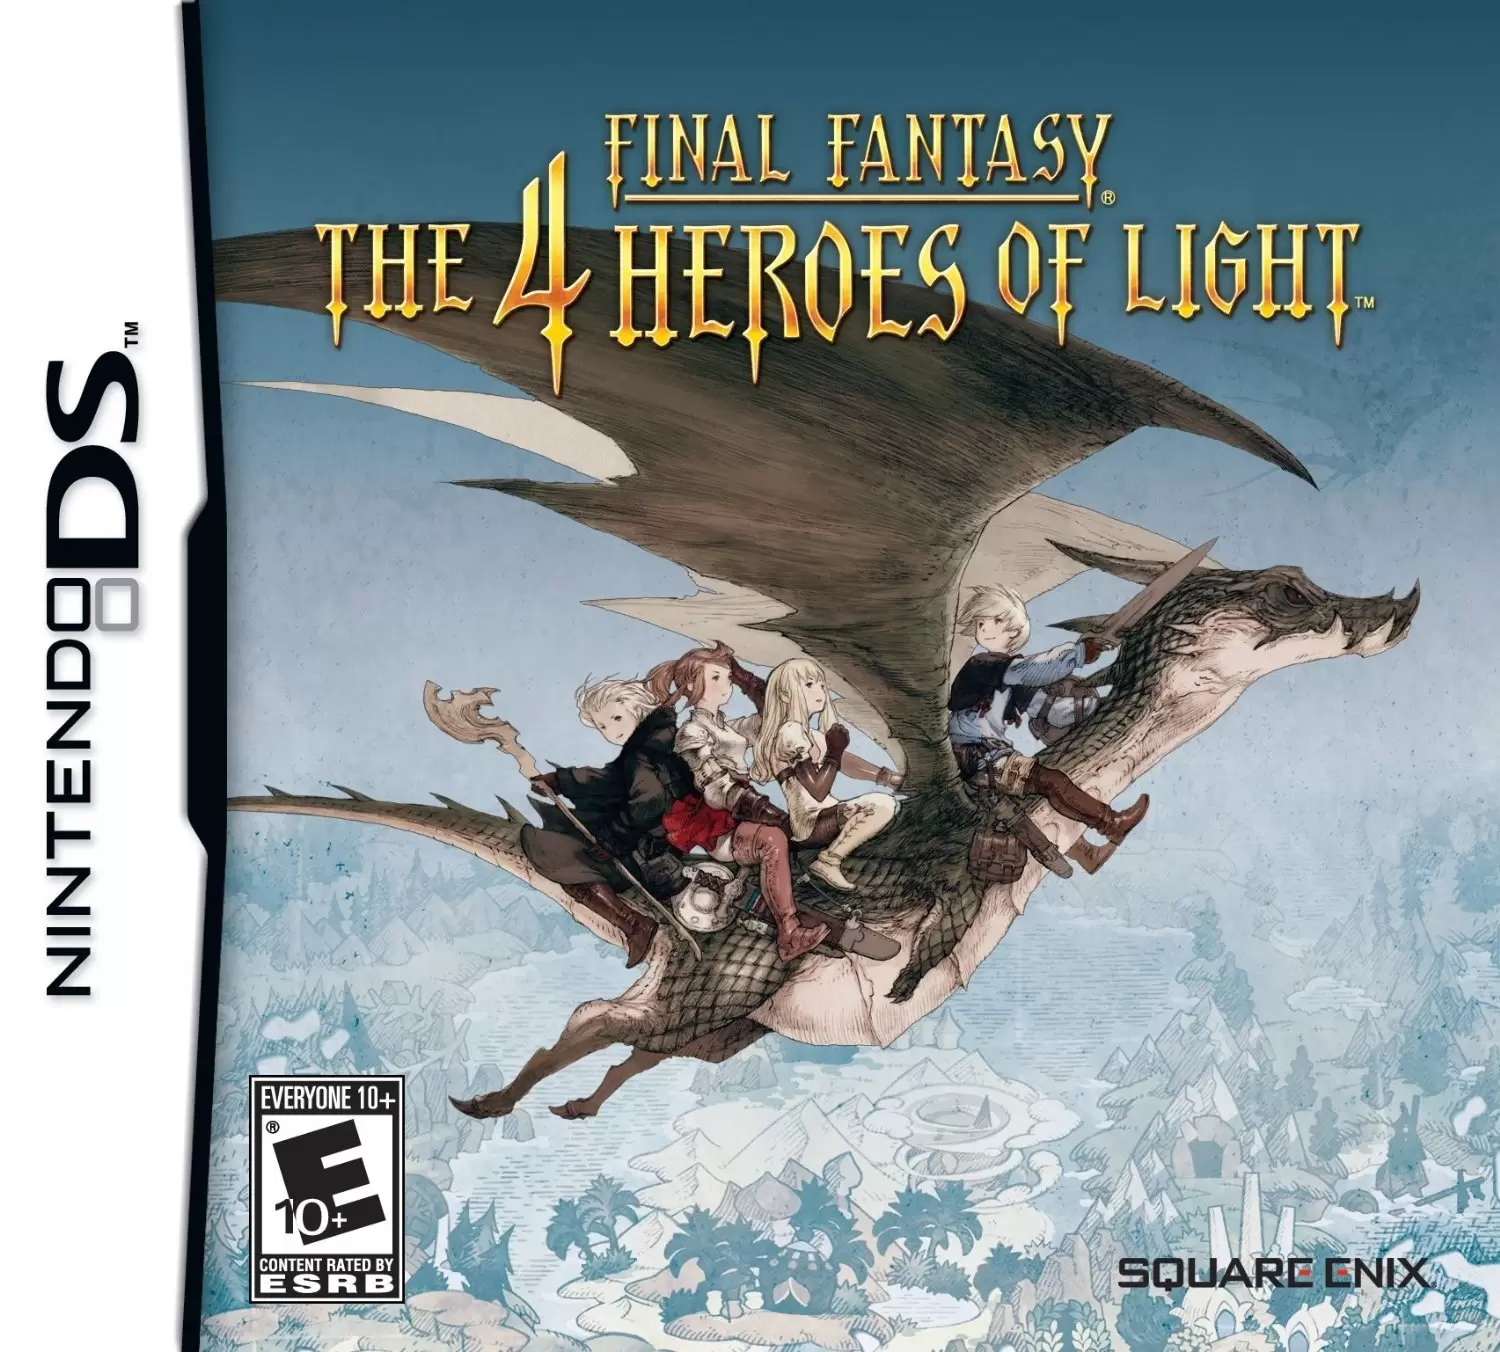 Jeux Nintendo DS - Final Fantasy: The 4 Heroes of Light